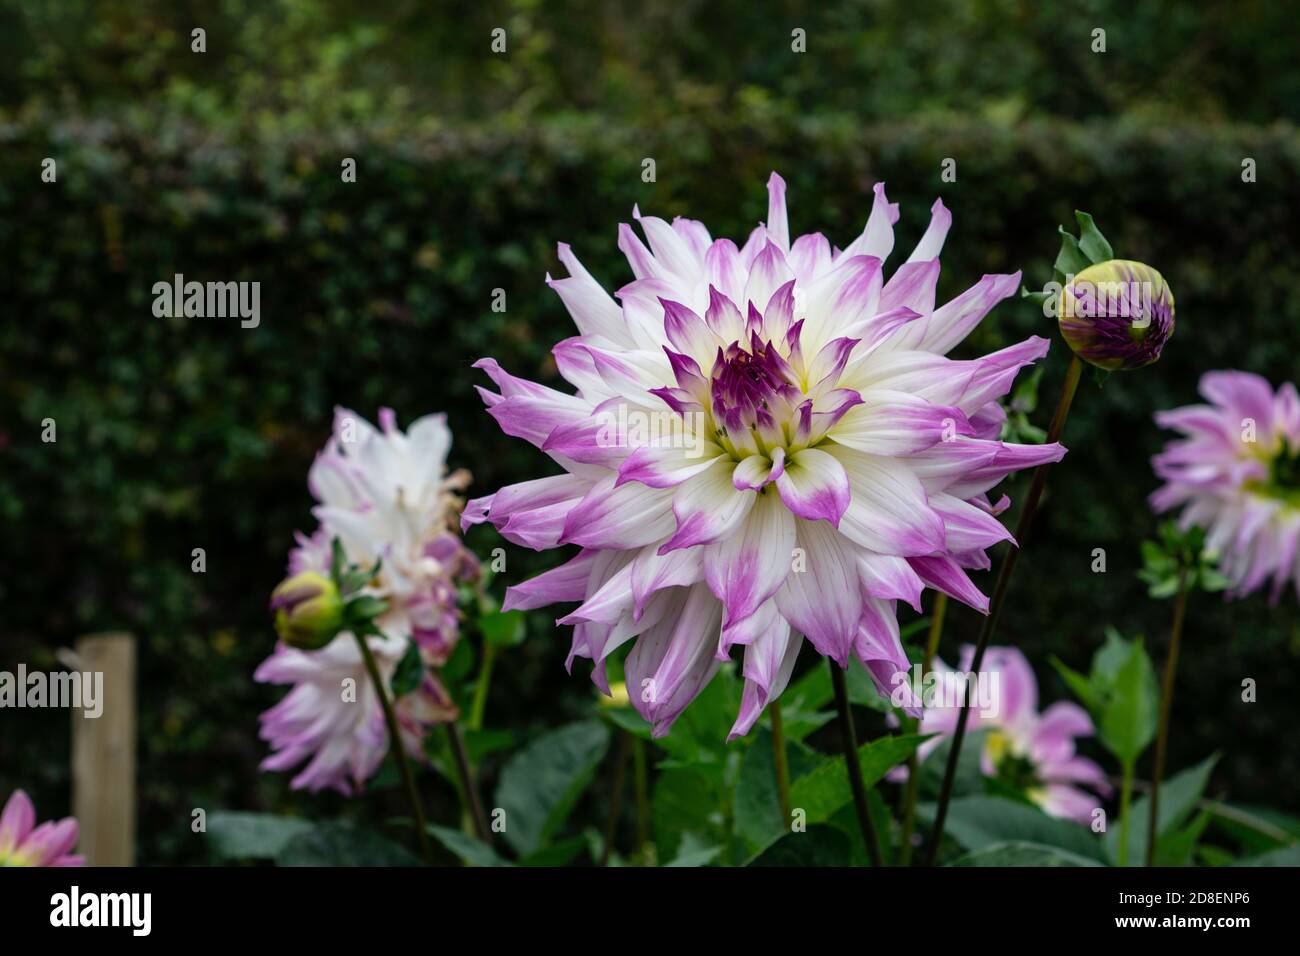 Dahlia Crazy Love white petals with lilac covered tips. Stock Photo